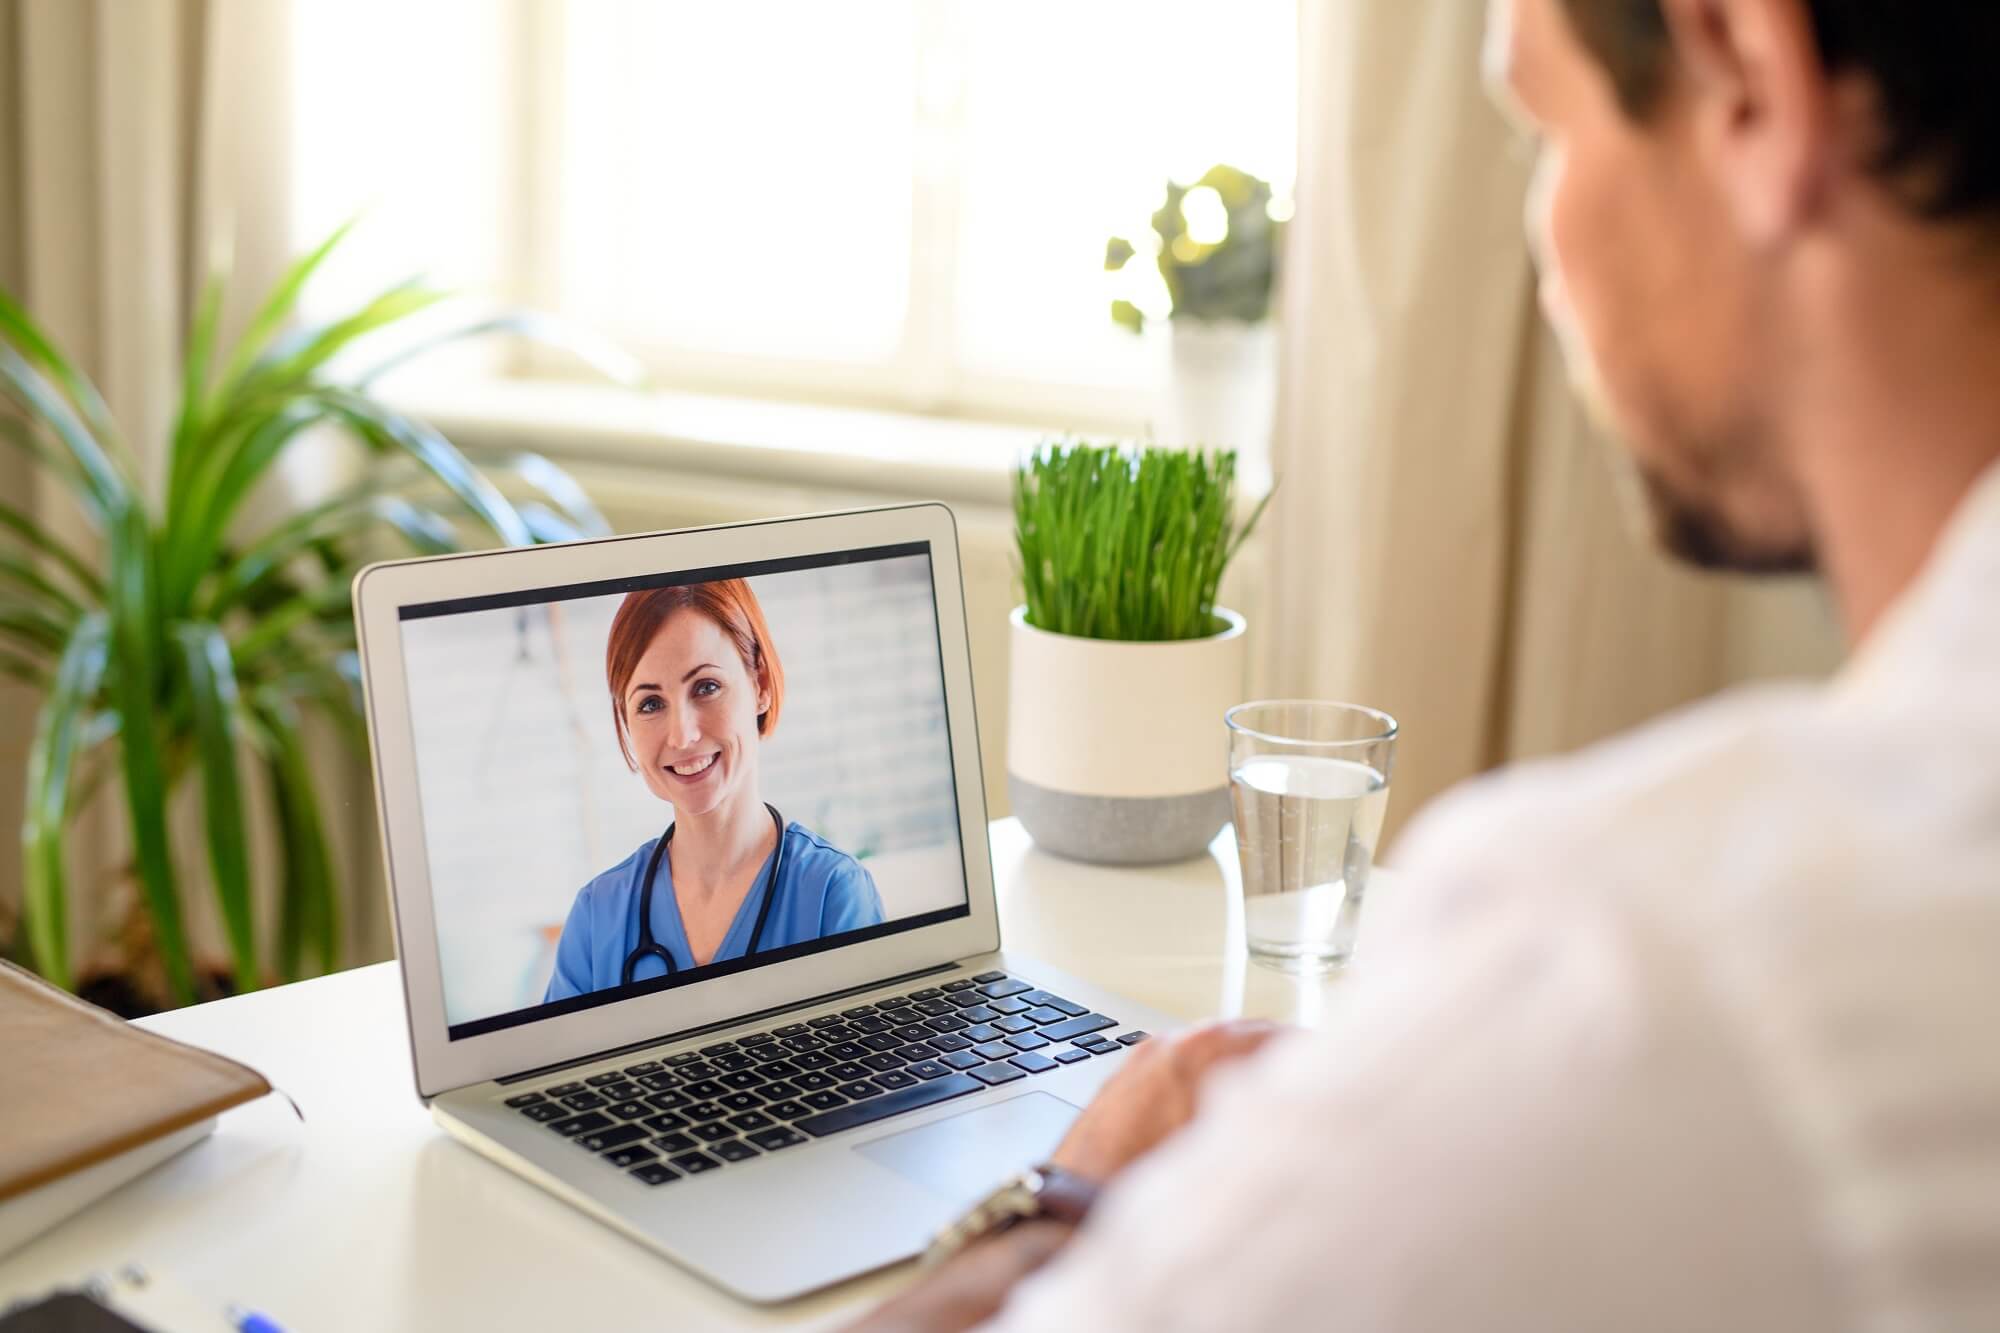 Mature man having video call with doctor on laptop at home